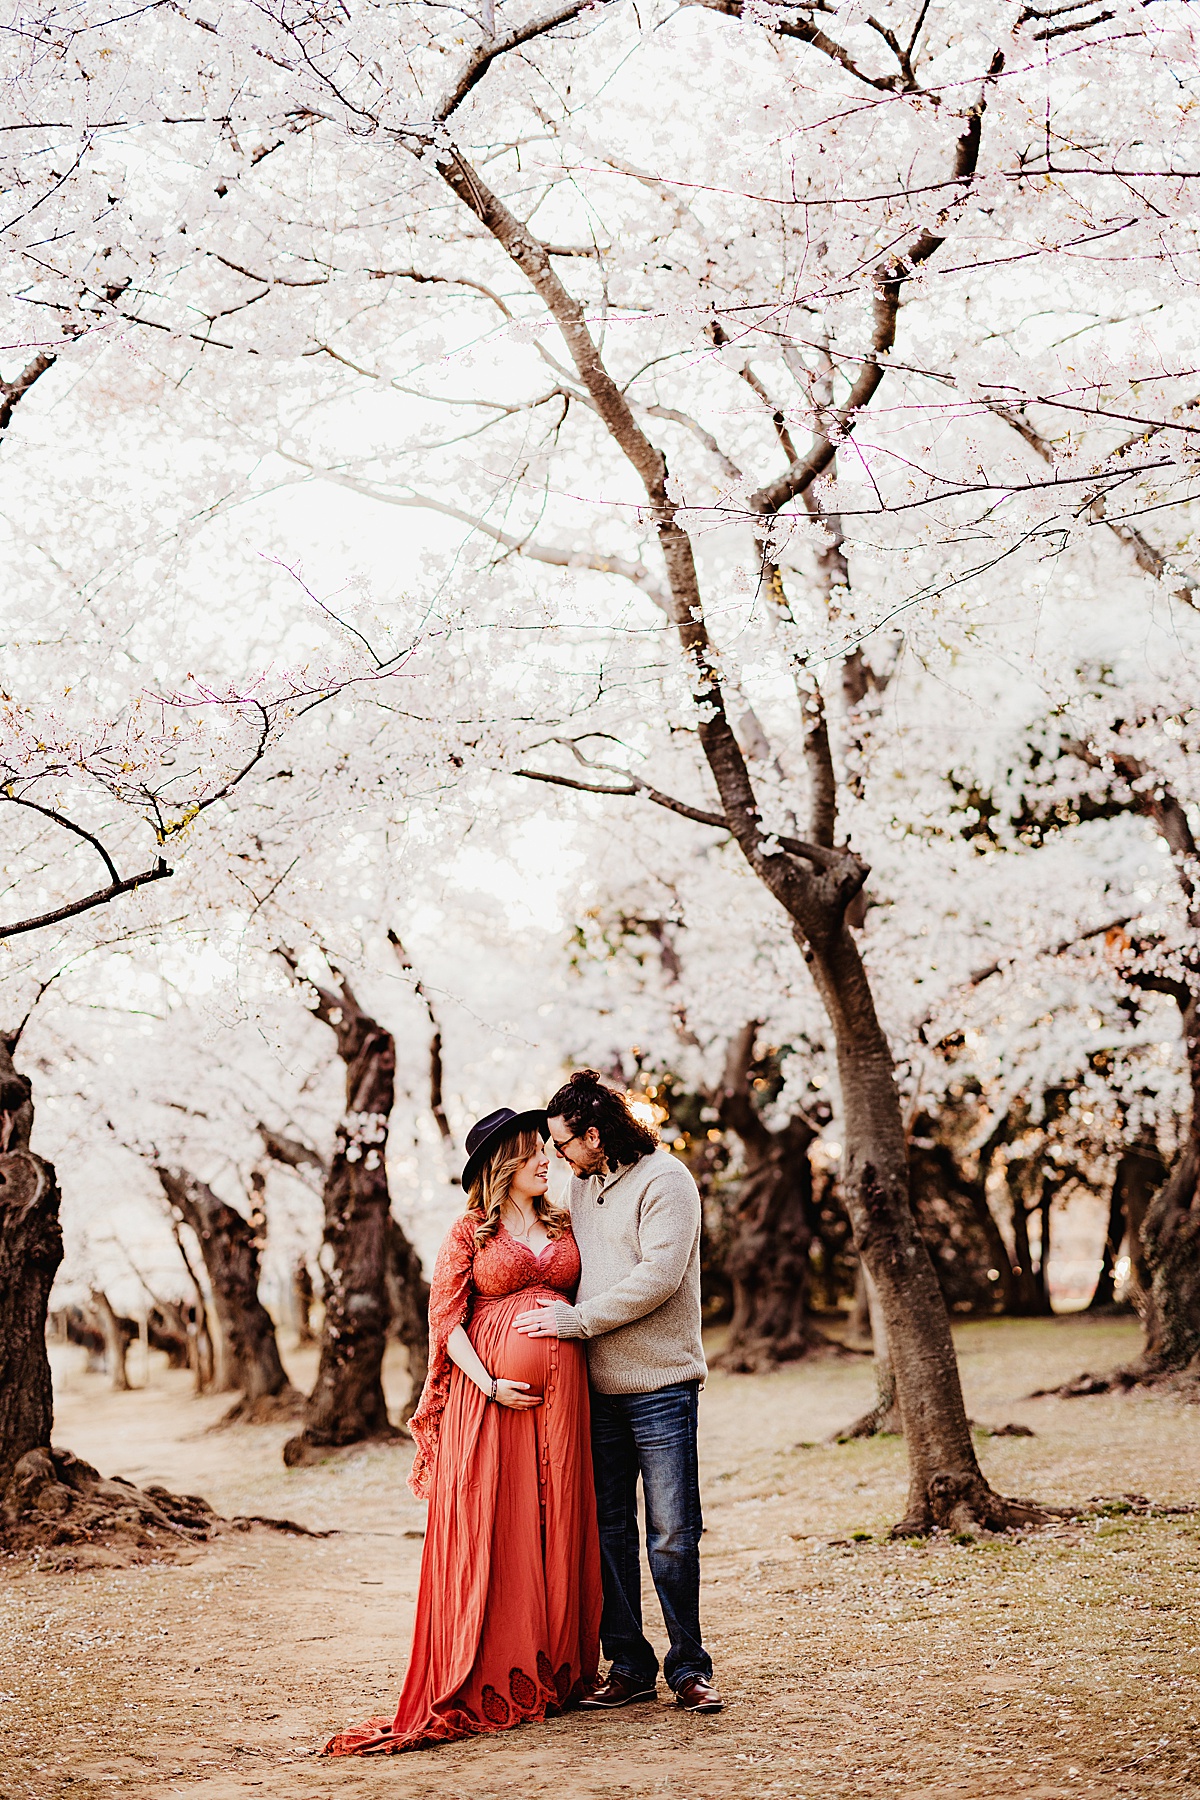 Maternity Session in Cherry Blossoms by Washington DC Photographer